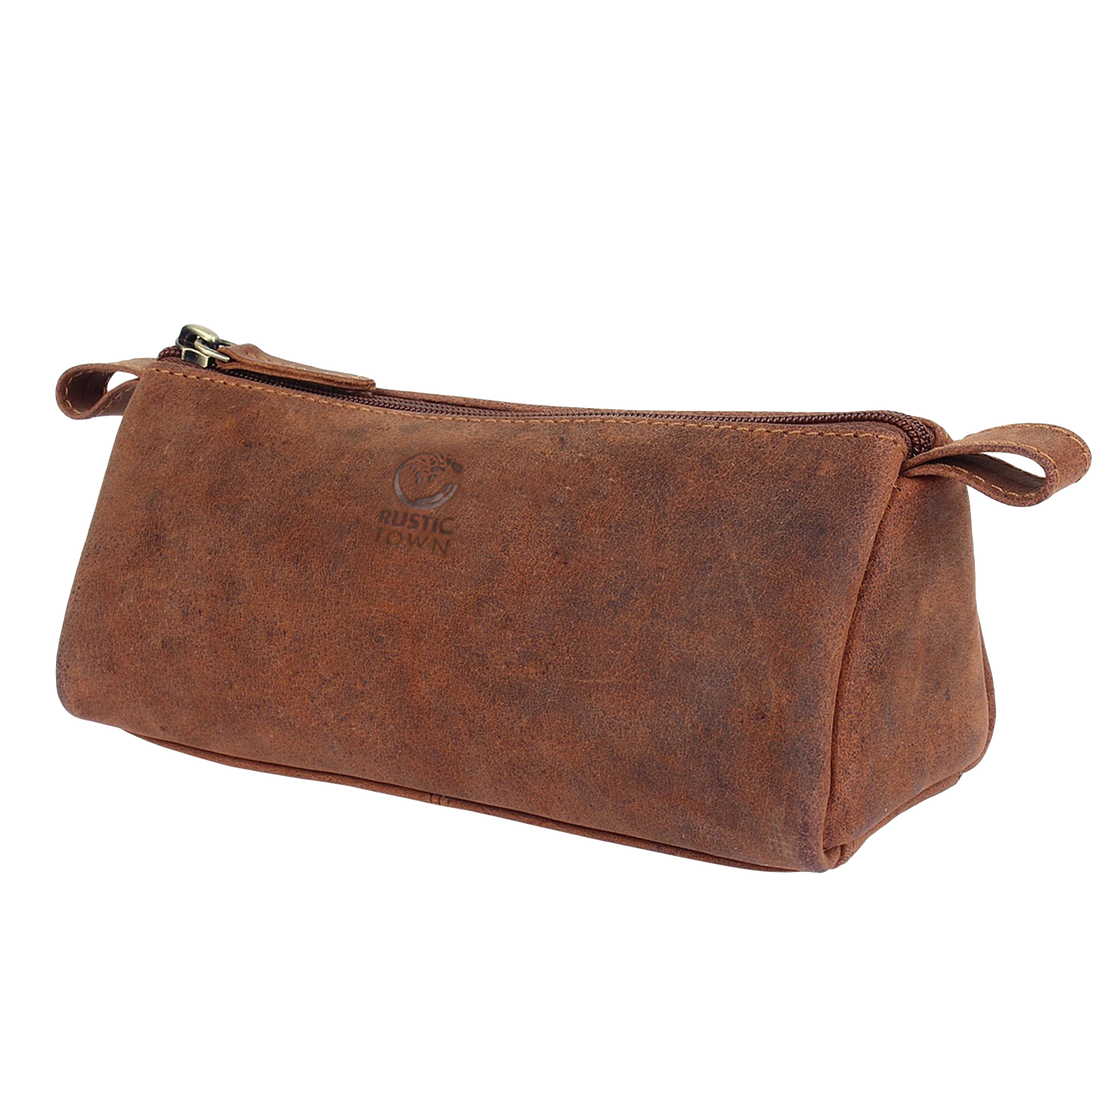 Pencil Case: Pen Pouch & Toiletry Kit In Leather Or Fabric